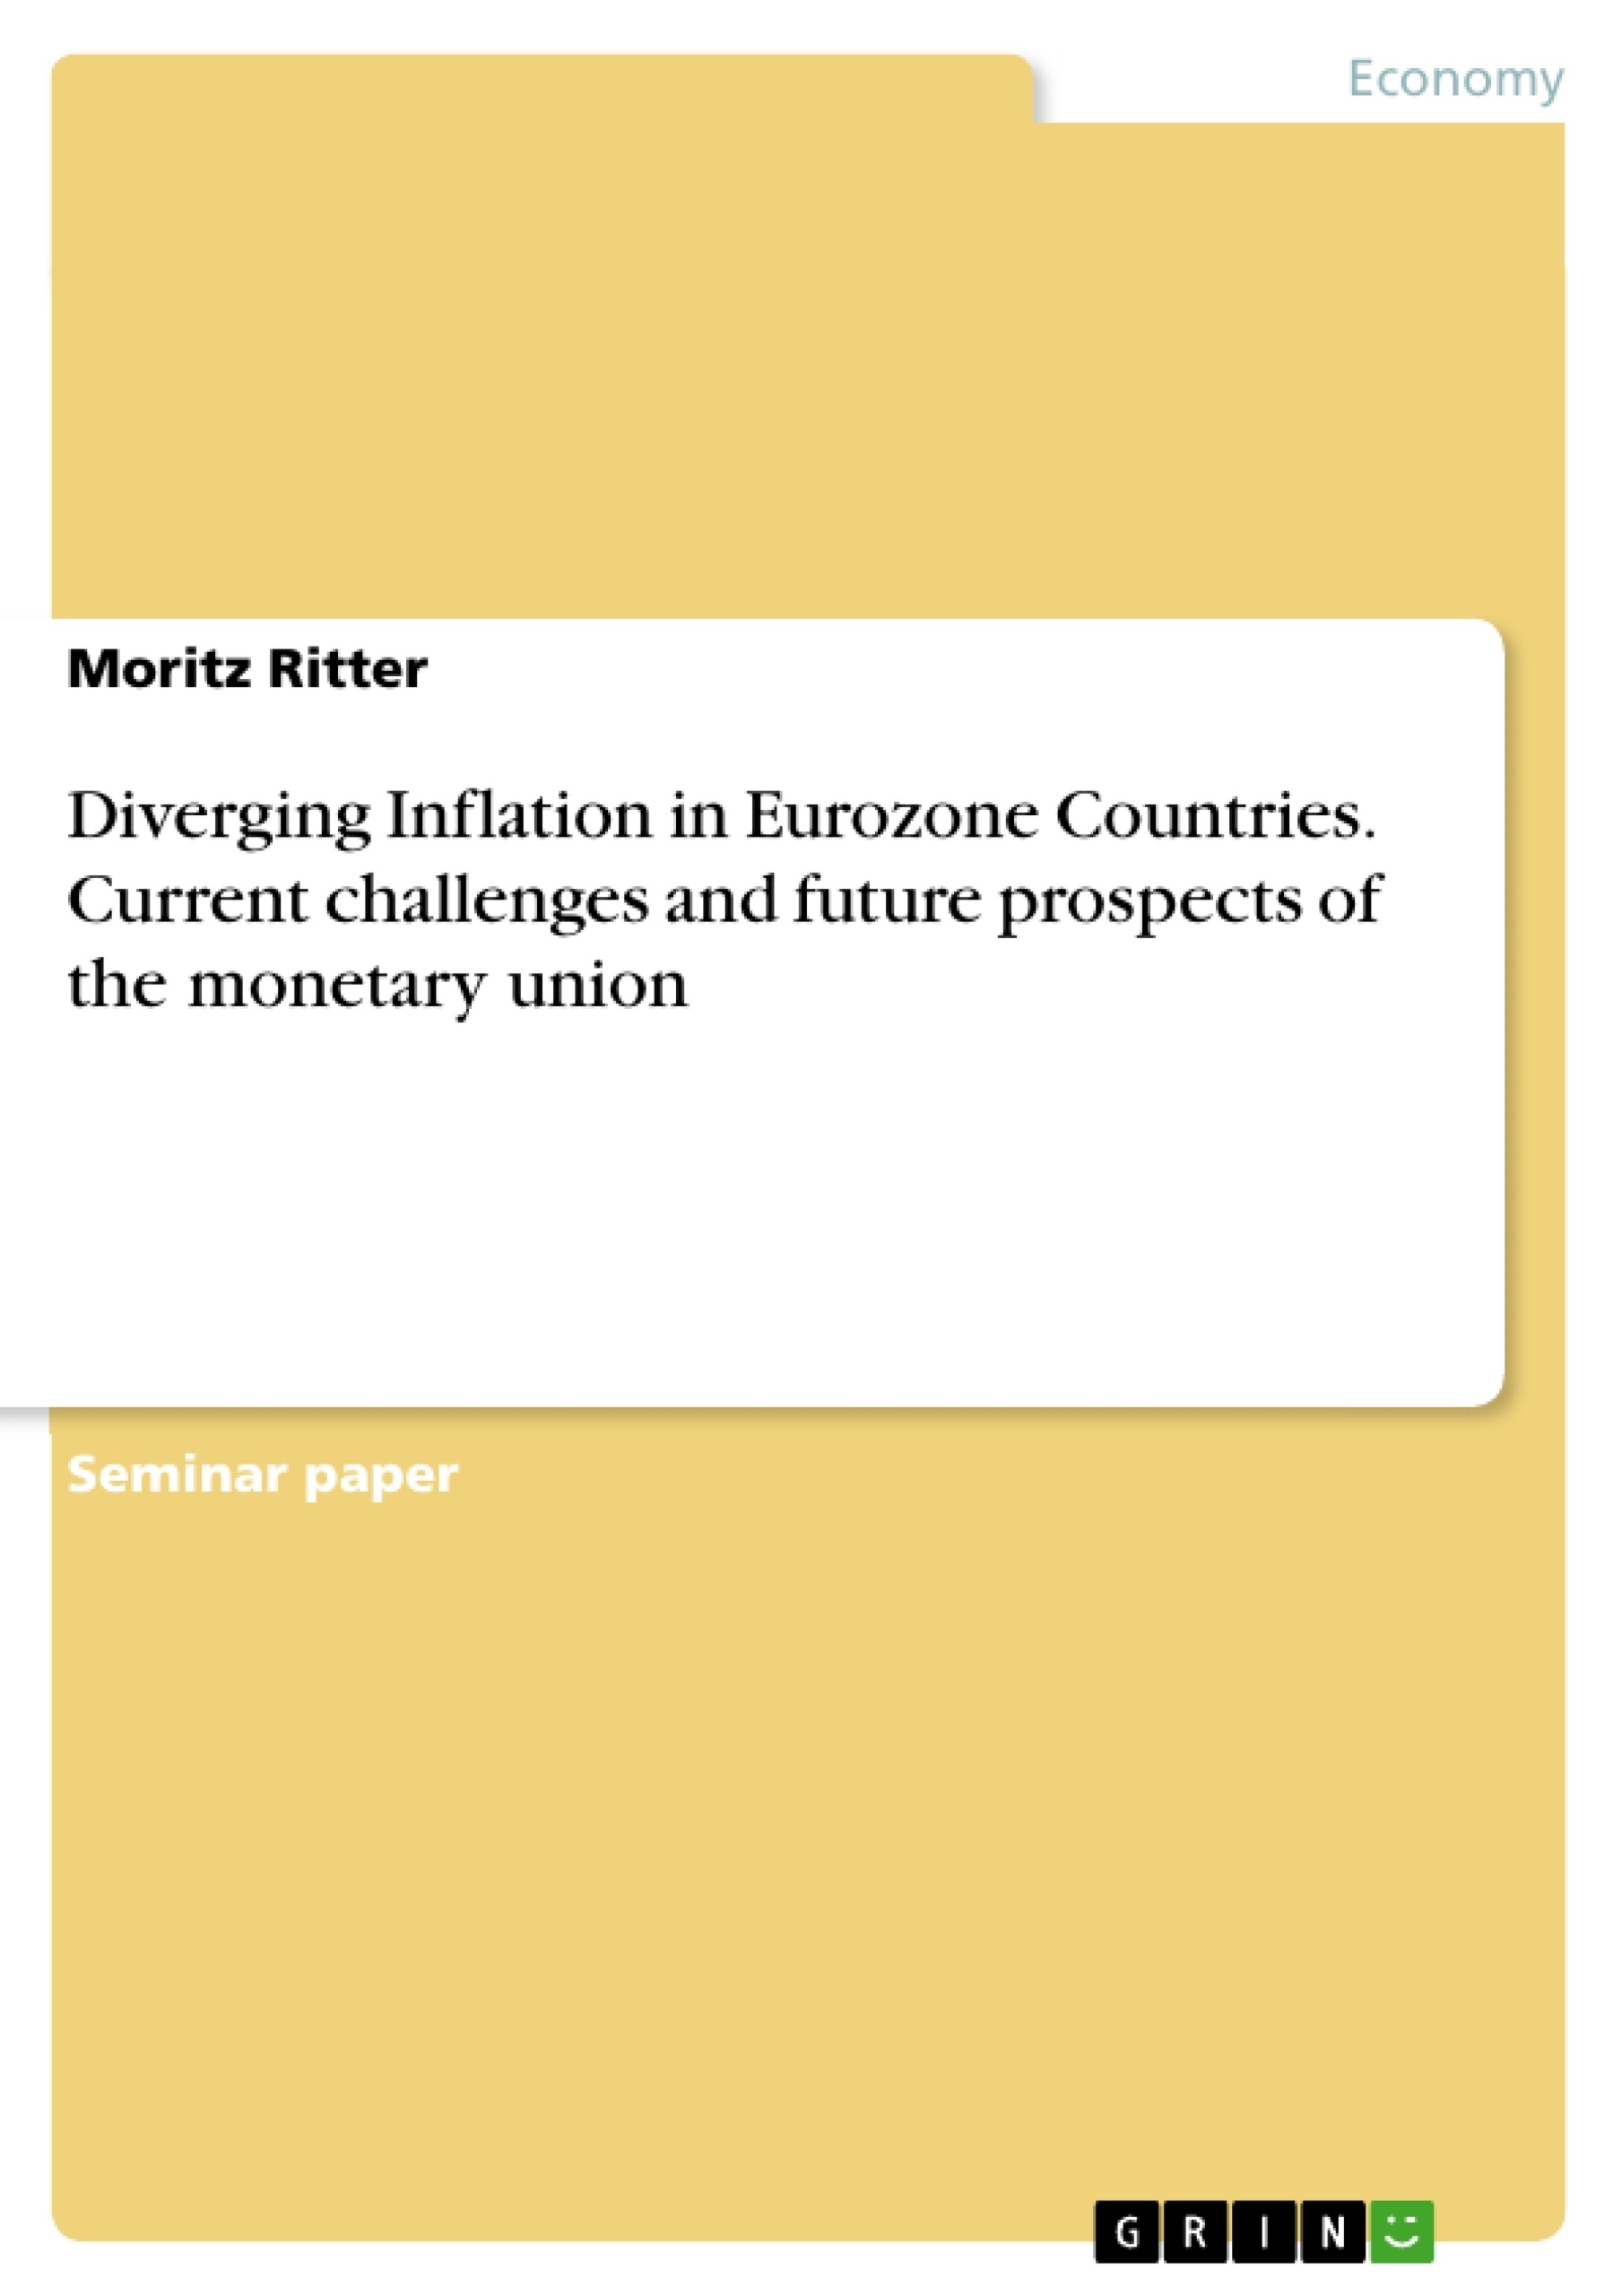 Title: Diverging Inflation in Eurozone Countries. Current challenges and future prospects of the monetary union